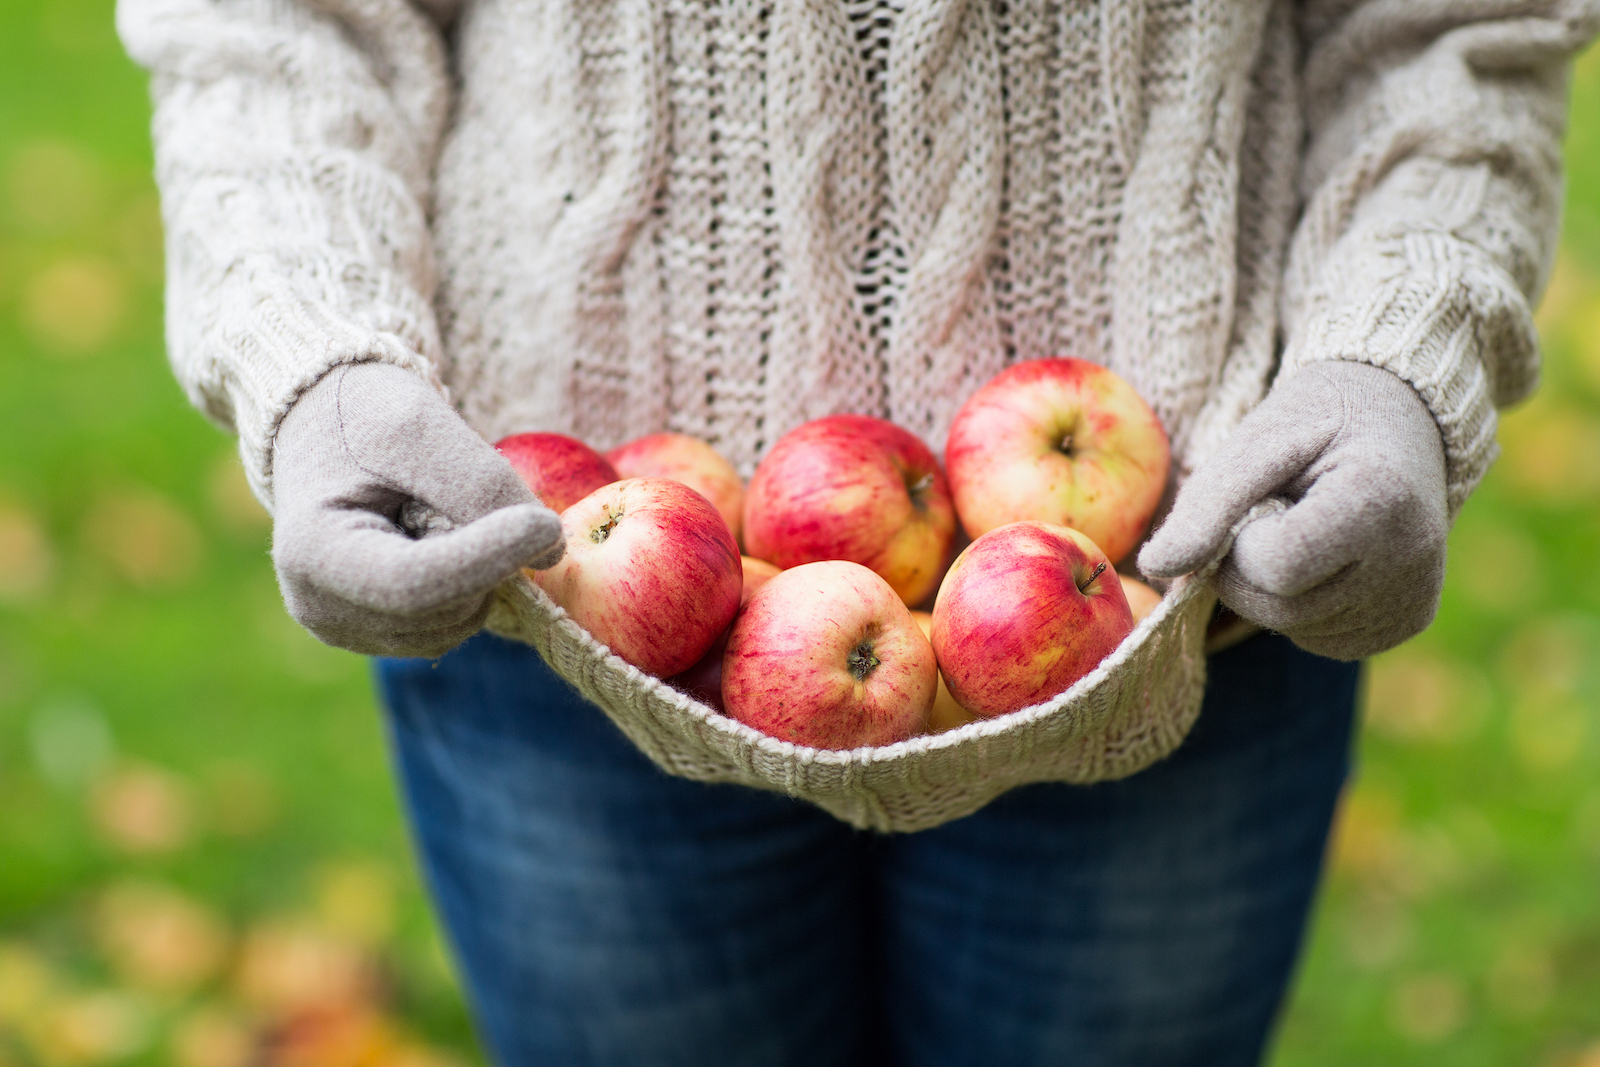 Apple Orchard near me - where to pick apples and apple recipes 